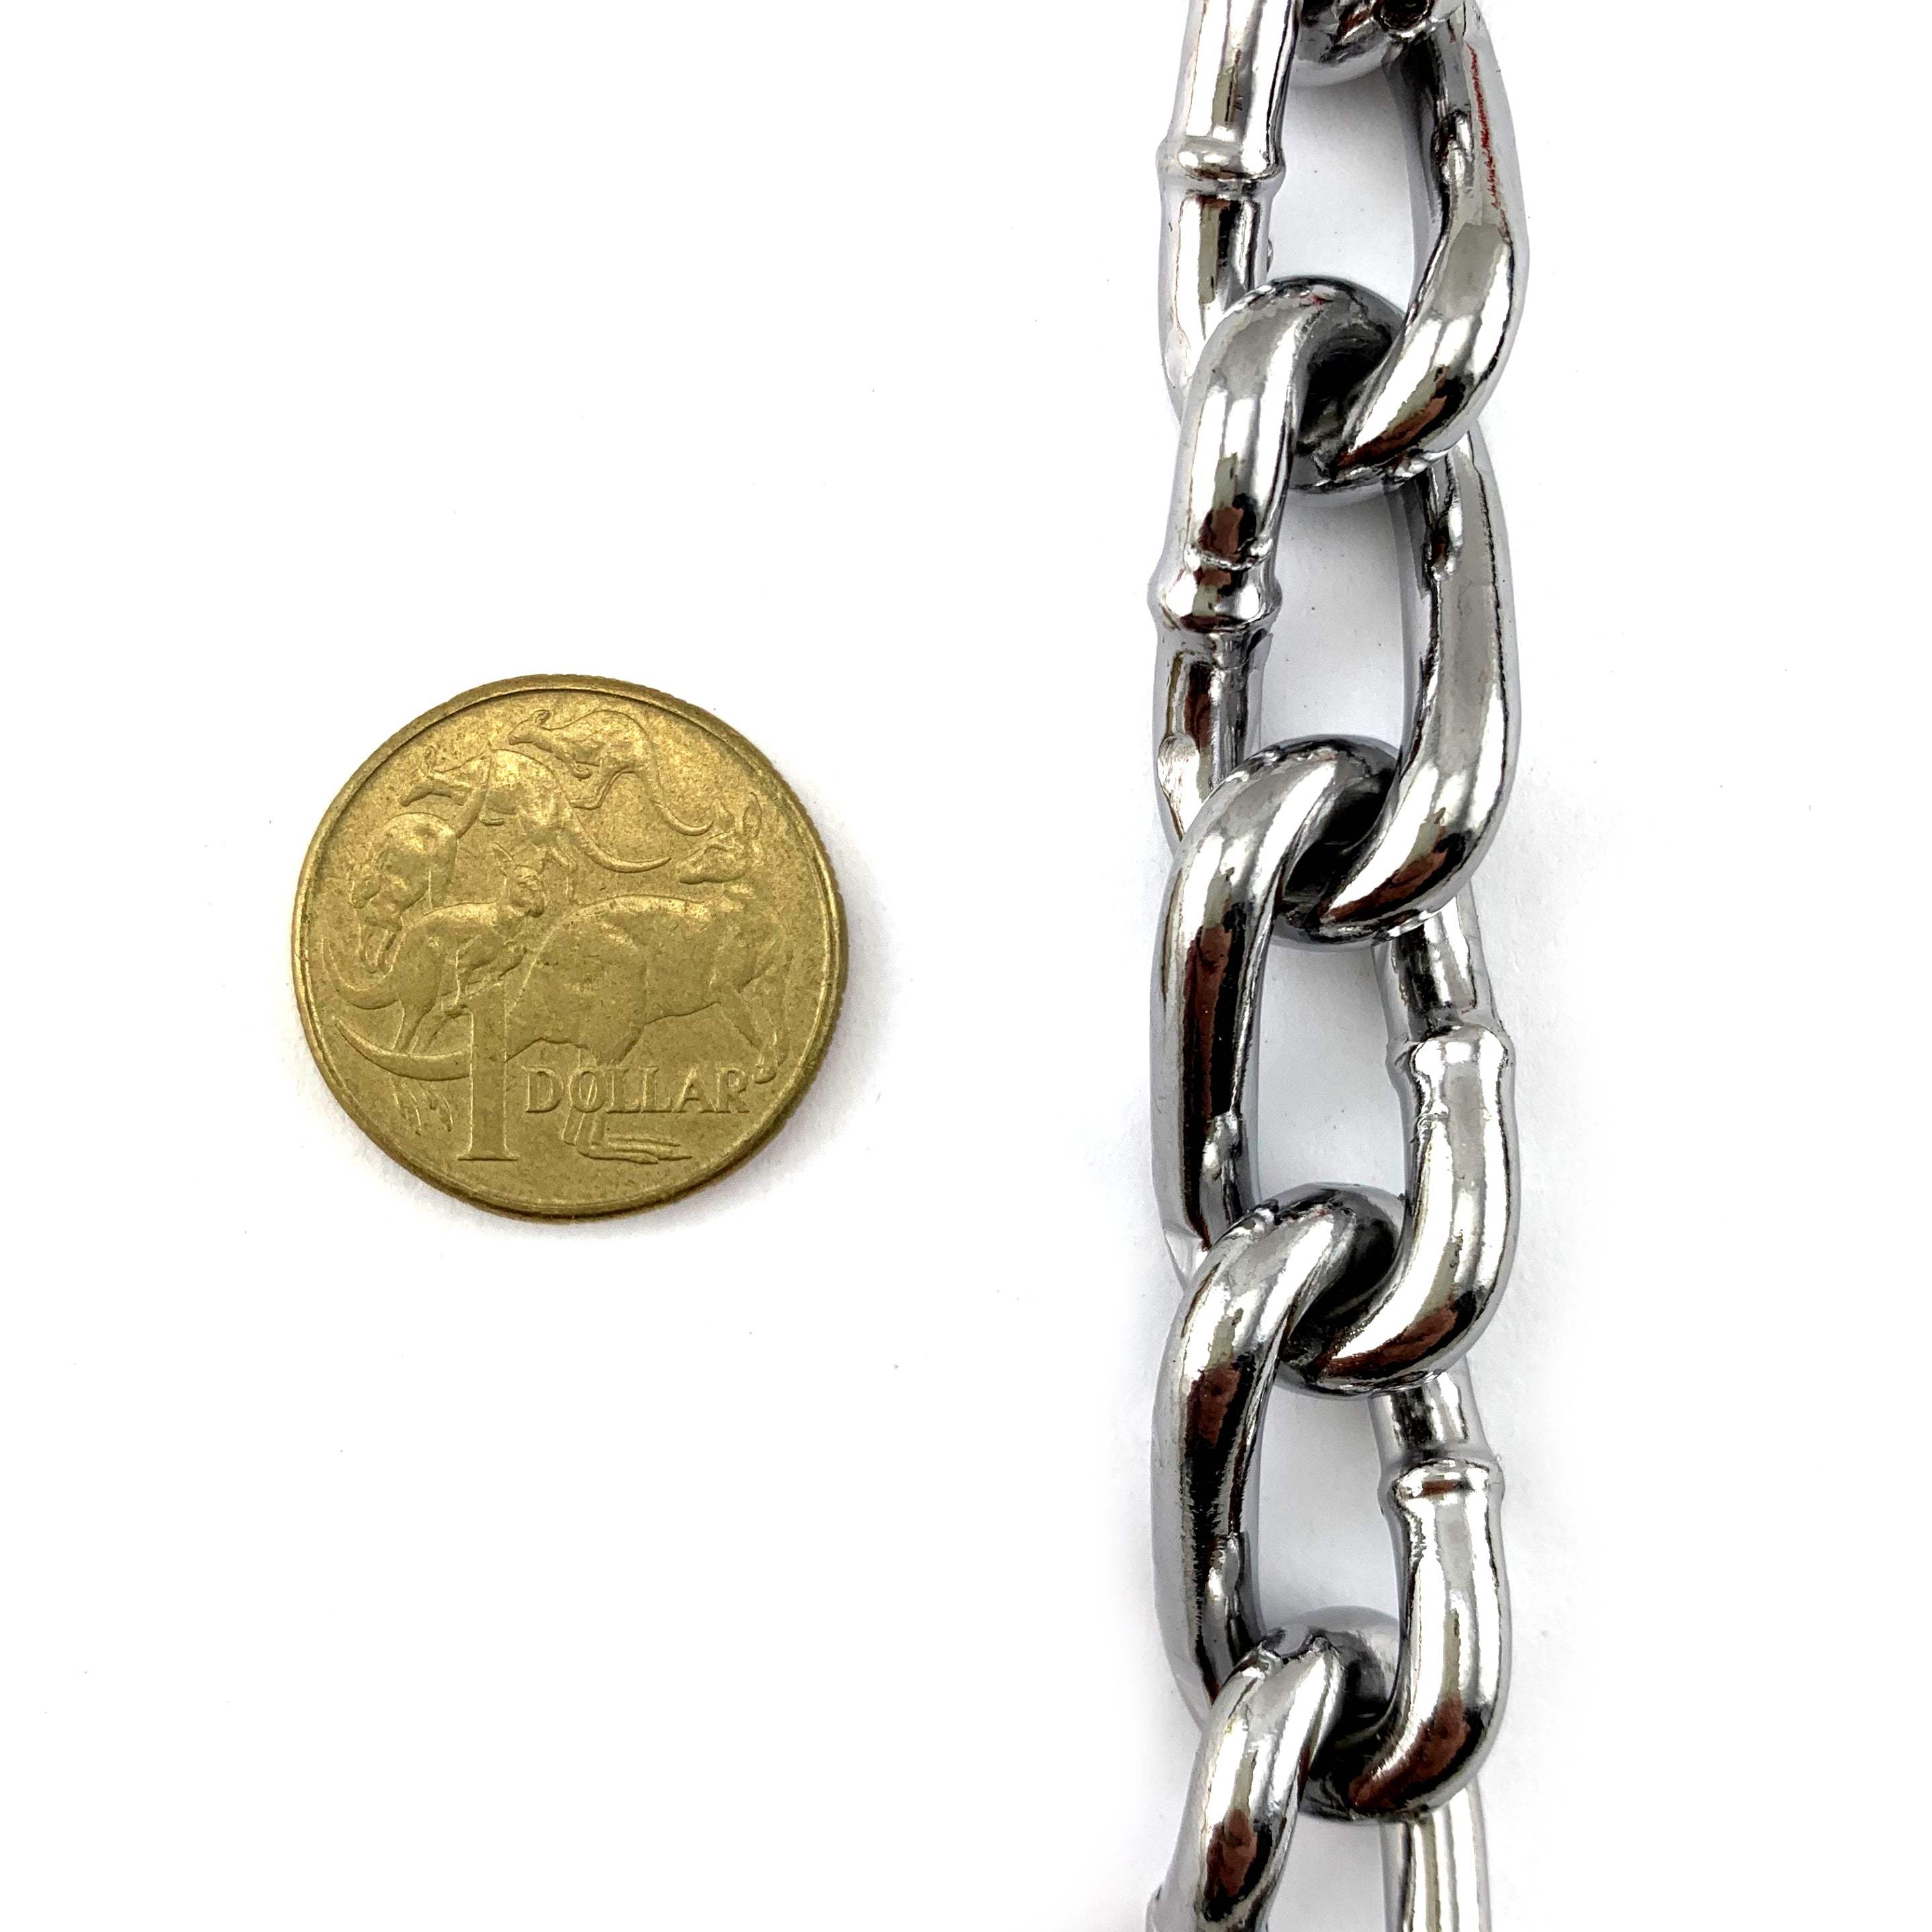 Chrome Curb Chain, size 4.8mm on a 30 metre reel. Melbourne and Australia wide delivery.